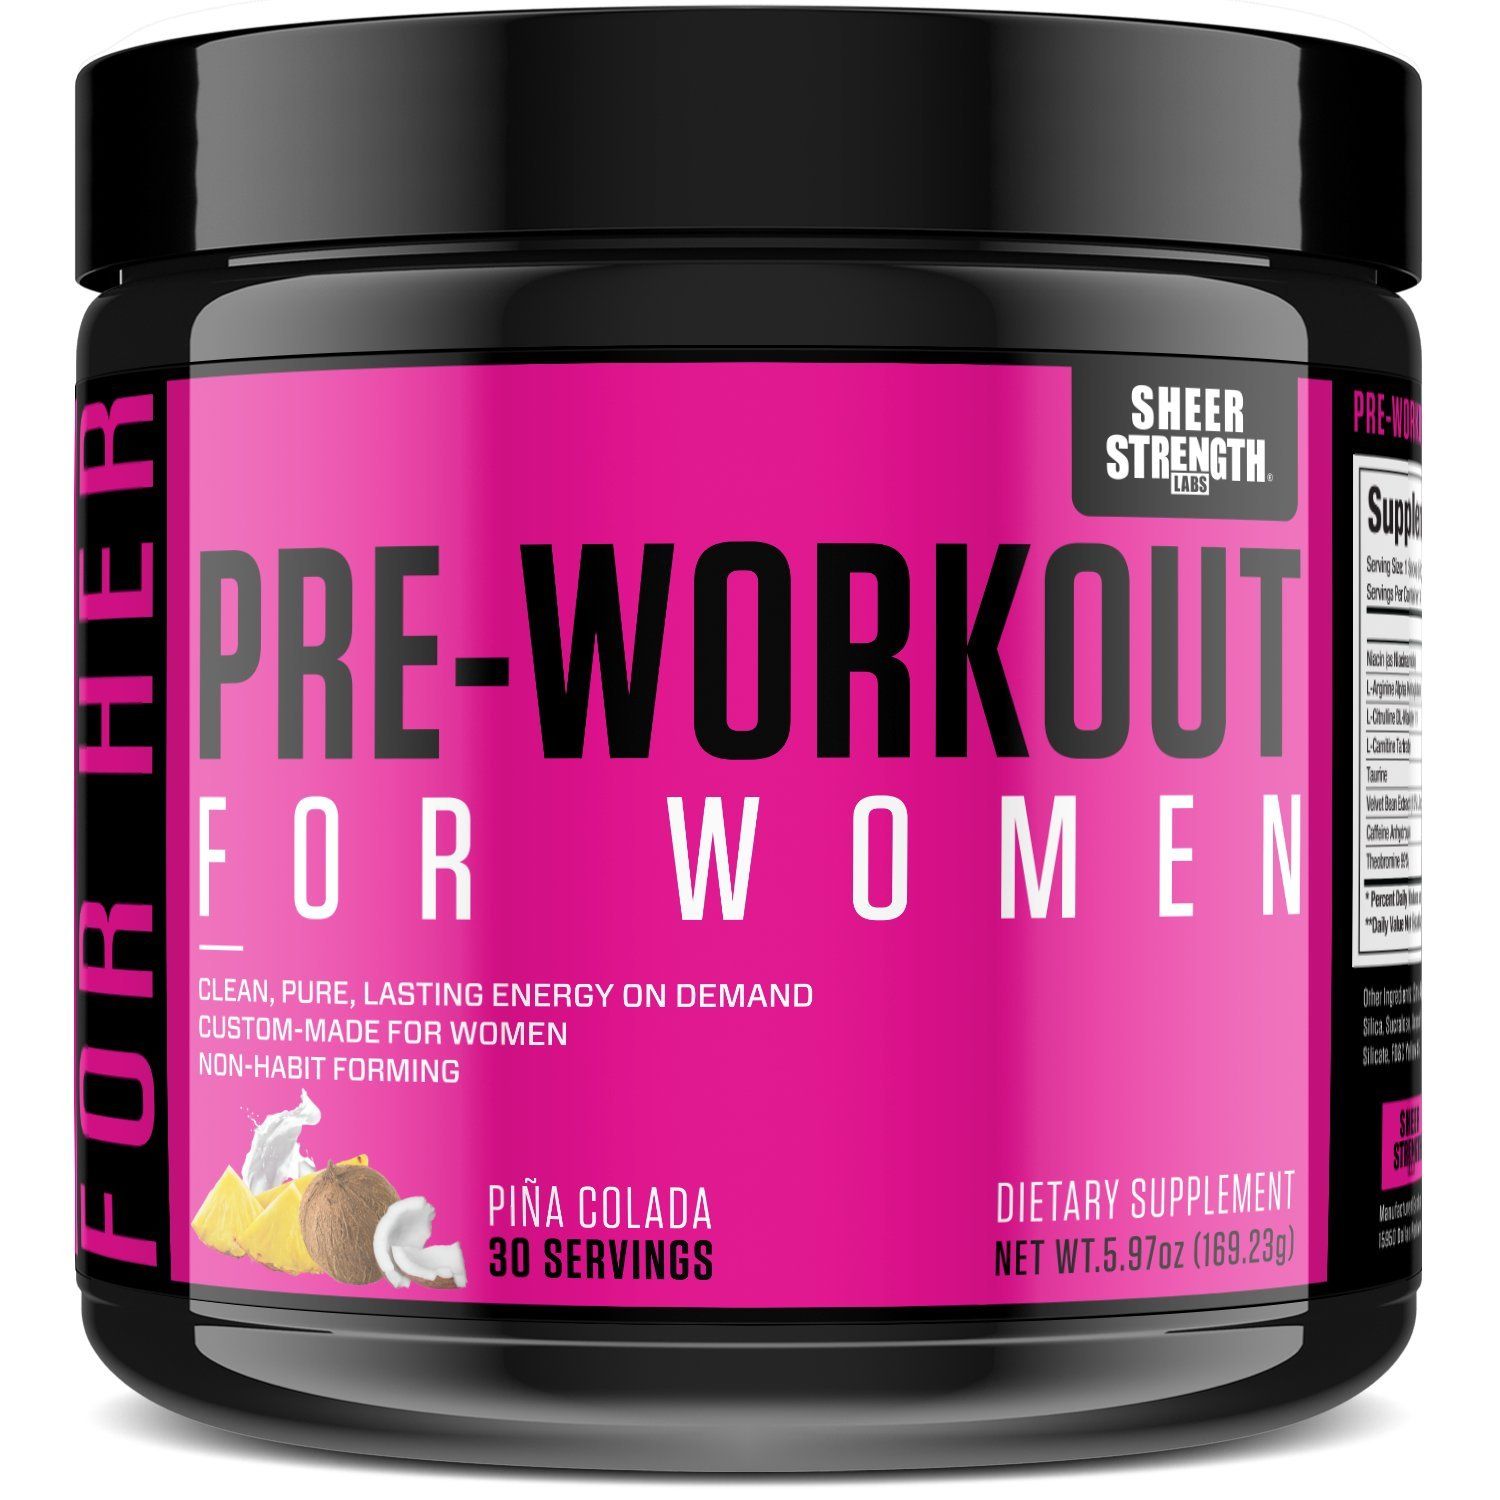 15 Minute Best Pre Workout For Female Runners for Gym